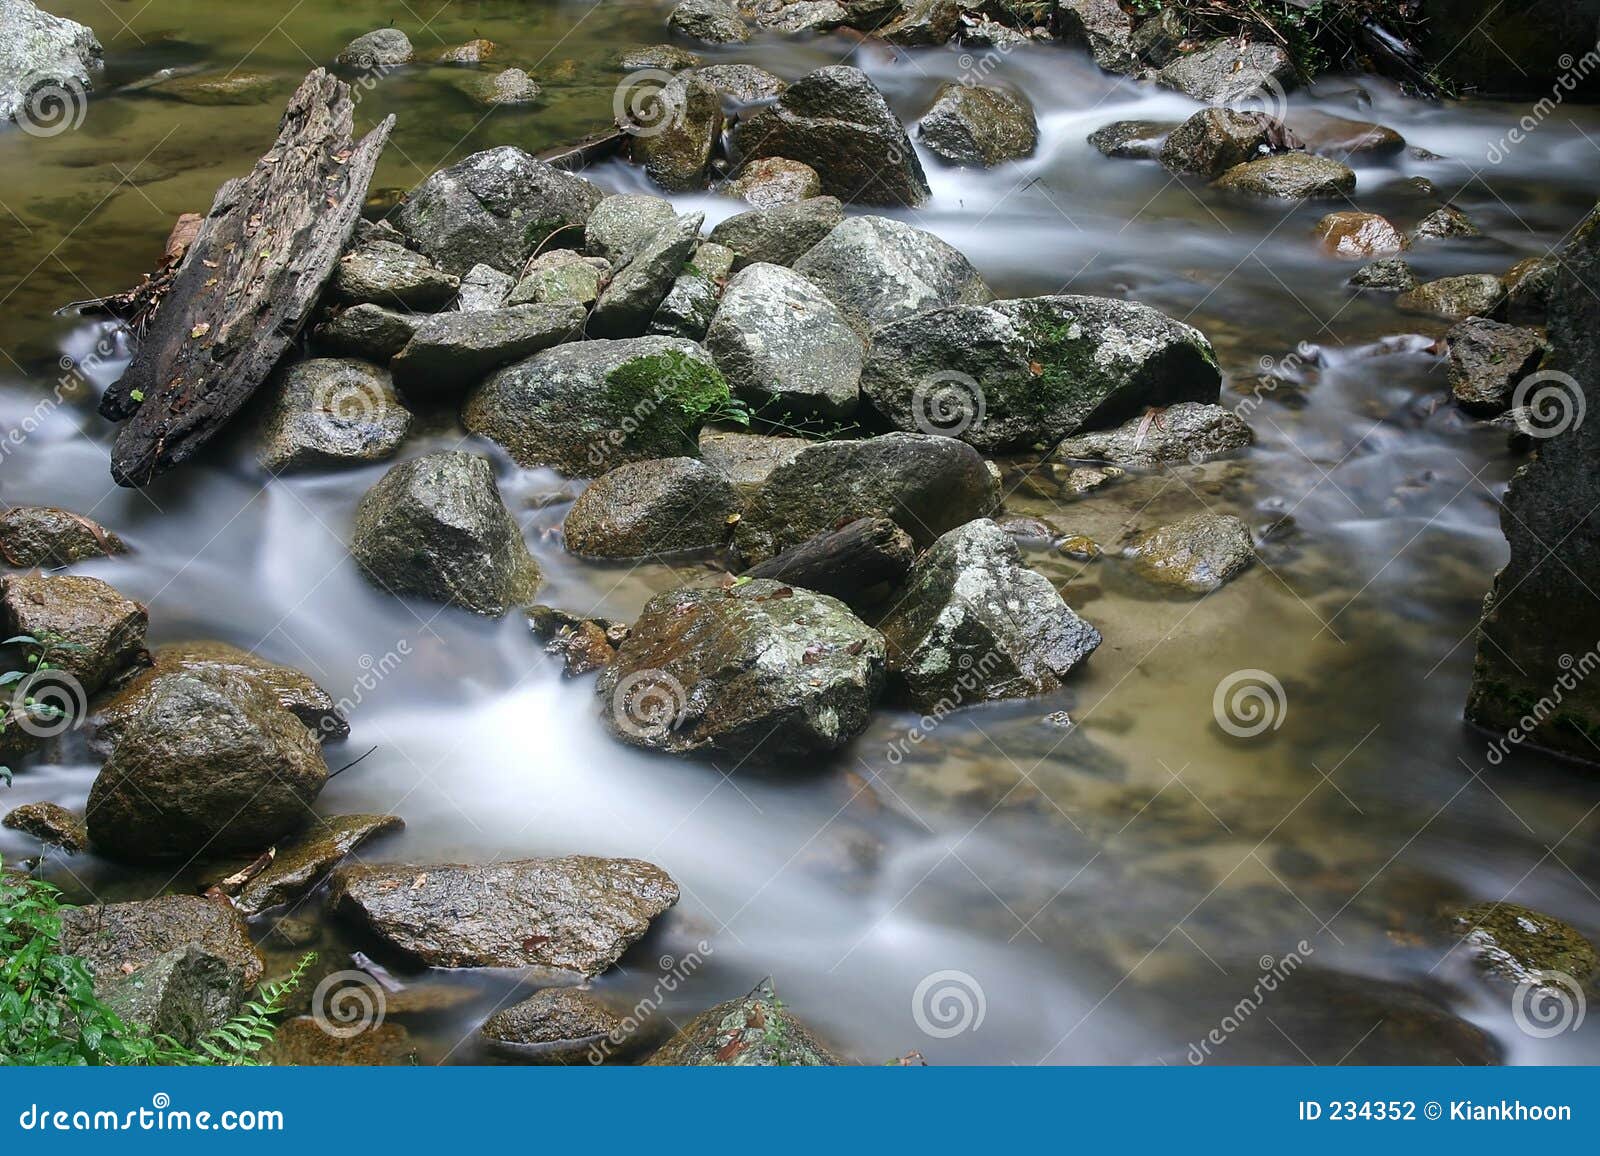 streams and stones